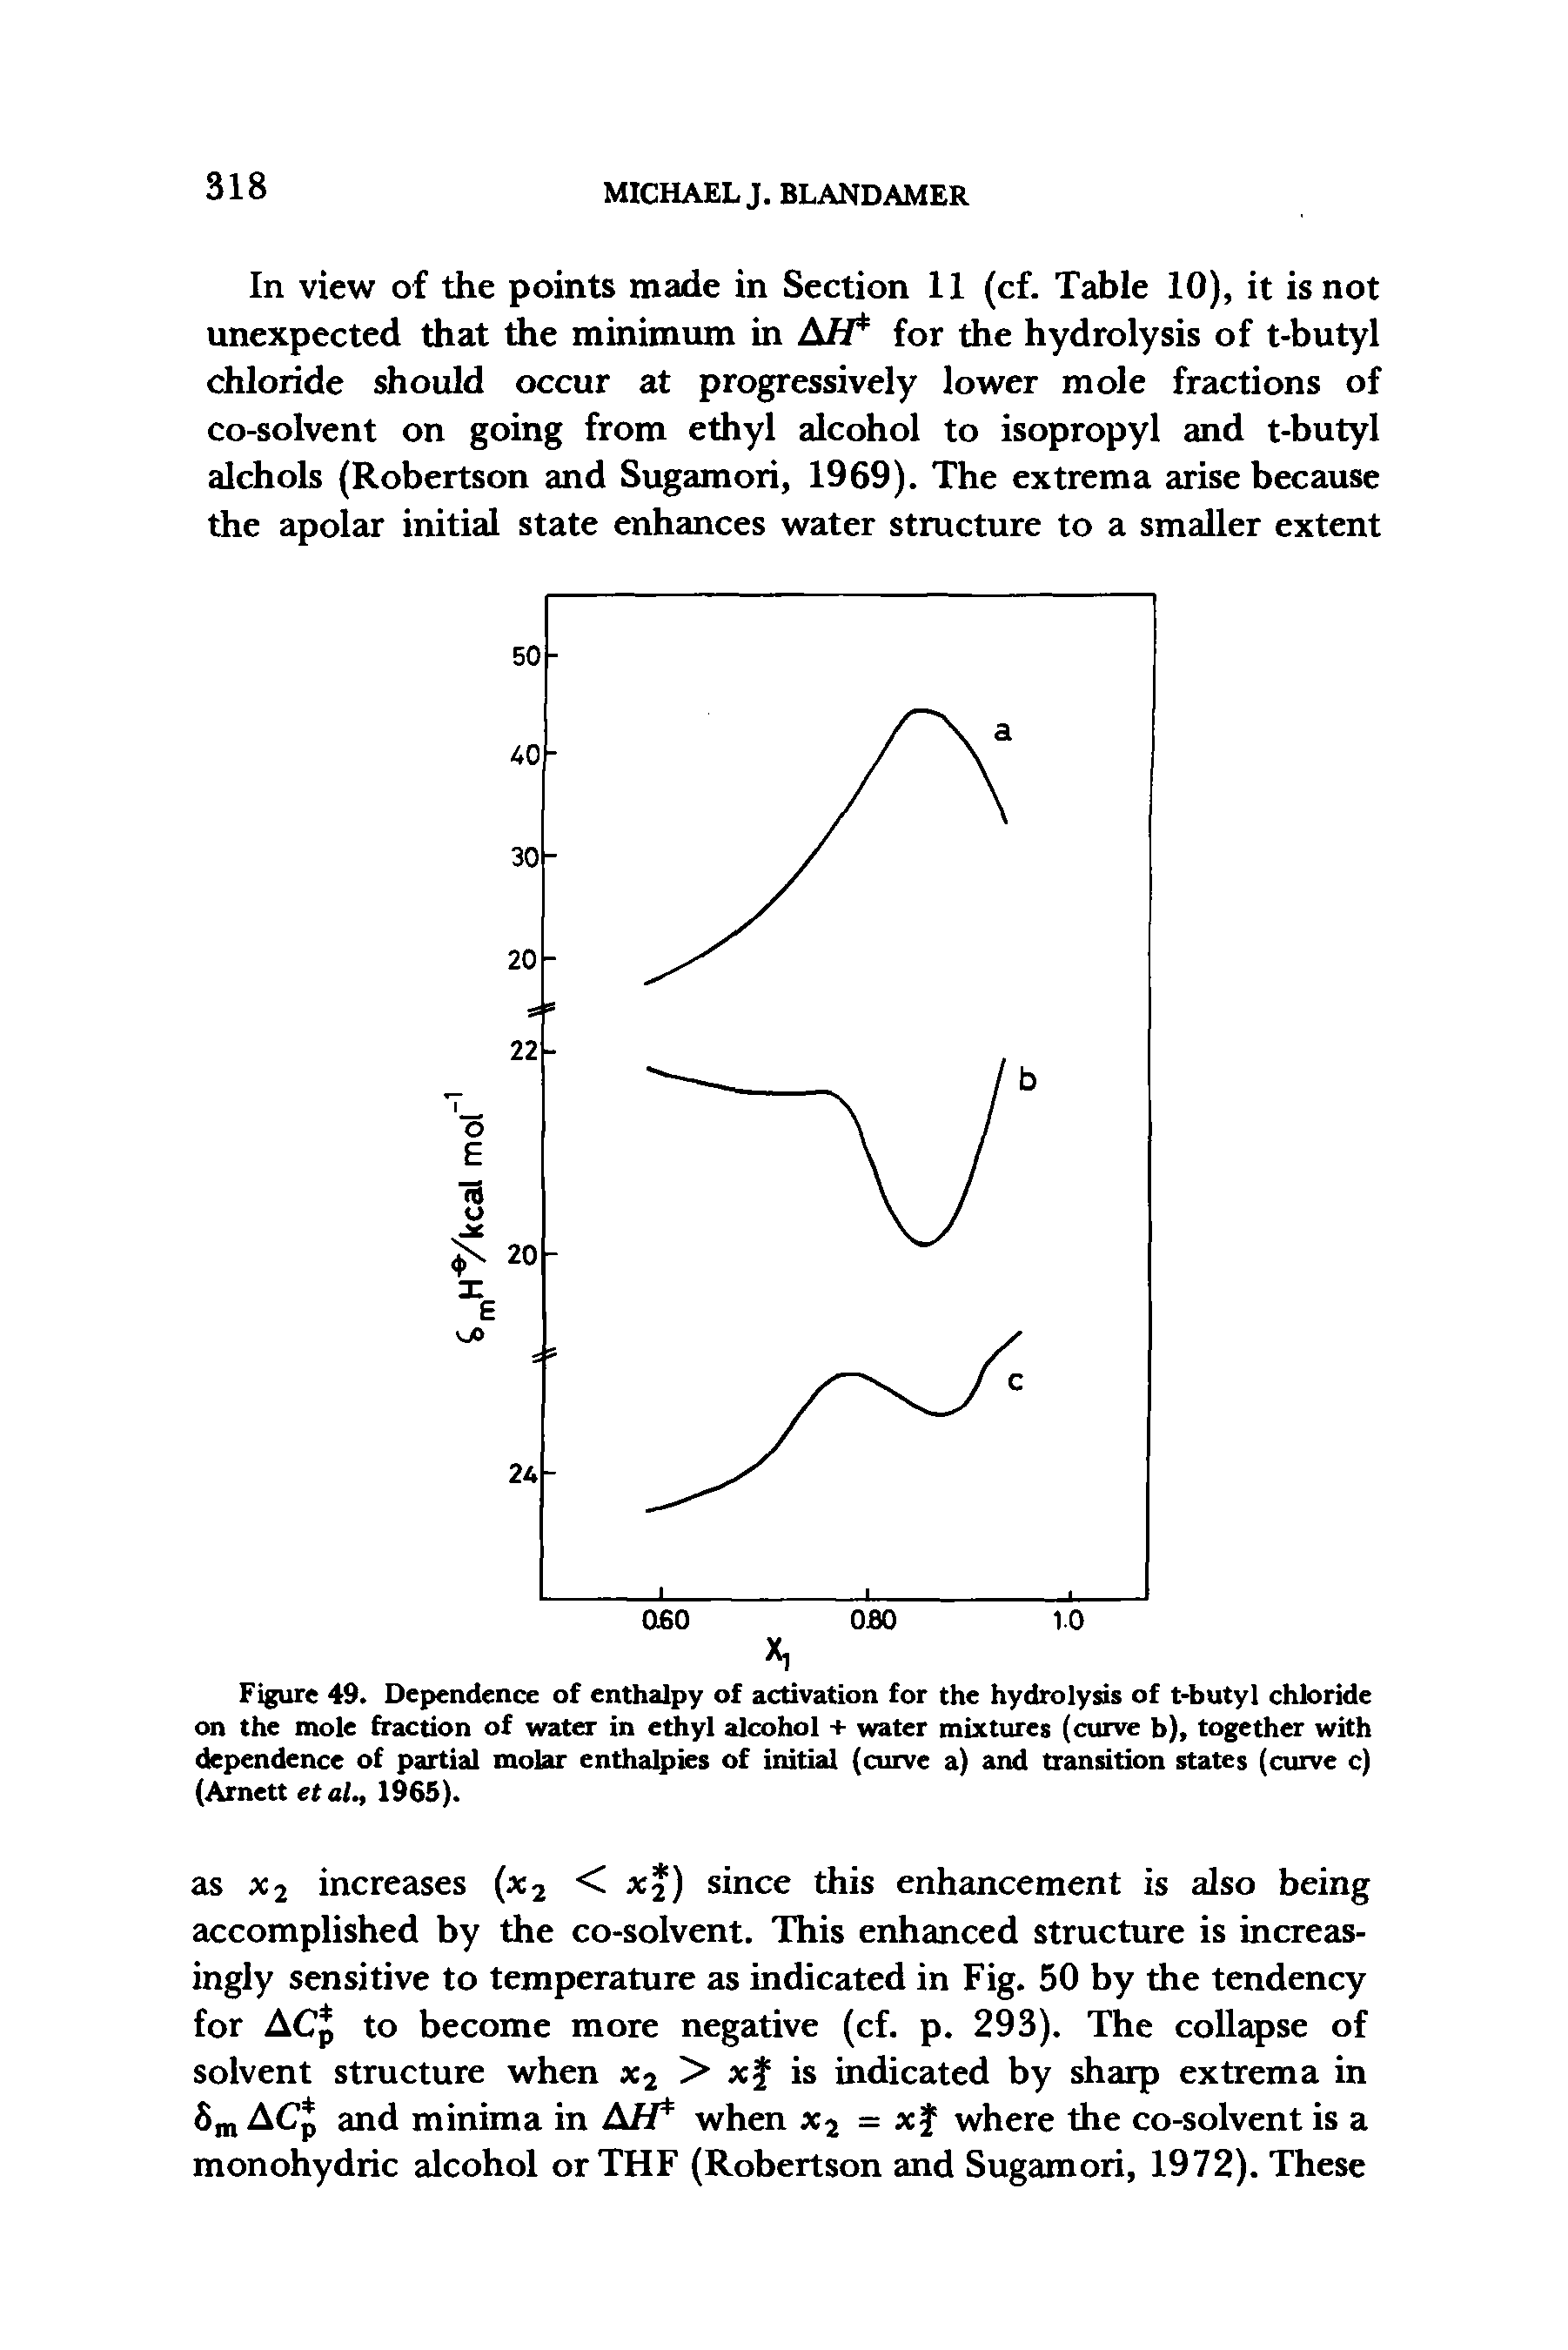 Figure 49. Dependence of enthalpy of activation for the hydrolysis of t-butyl chloride on the mole fraction of water in ethyl alcohol + water mixtures (curve b), together with dependence of partial molar enthalpies of initial (curve a) and transition states (curve c) (Arnett etal., 1965).